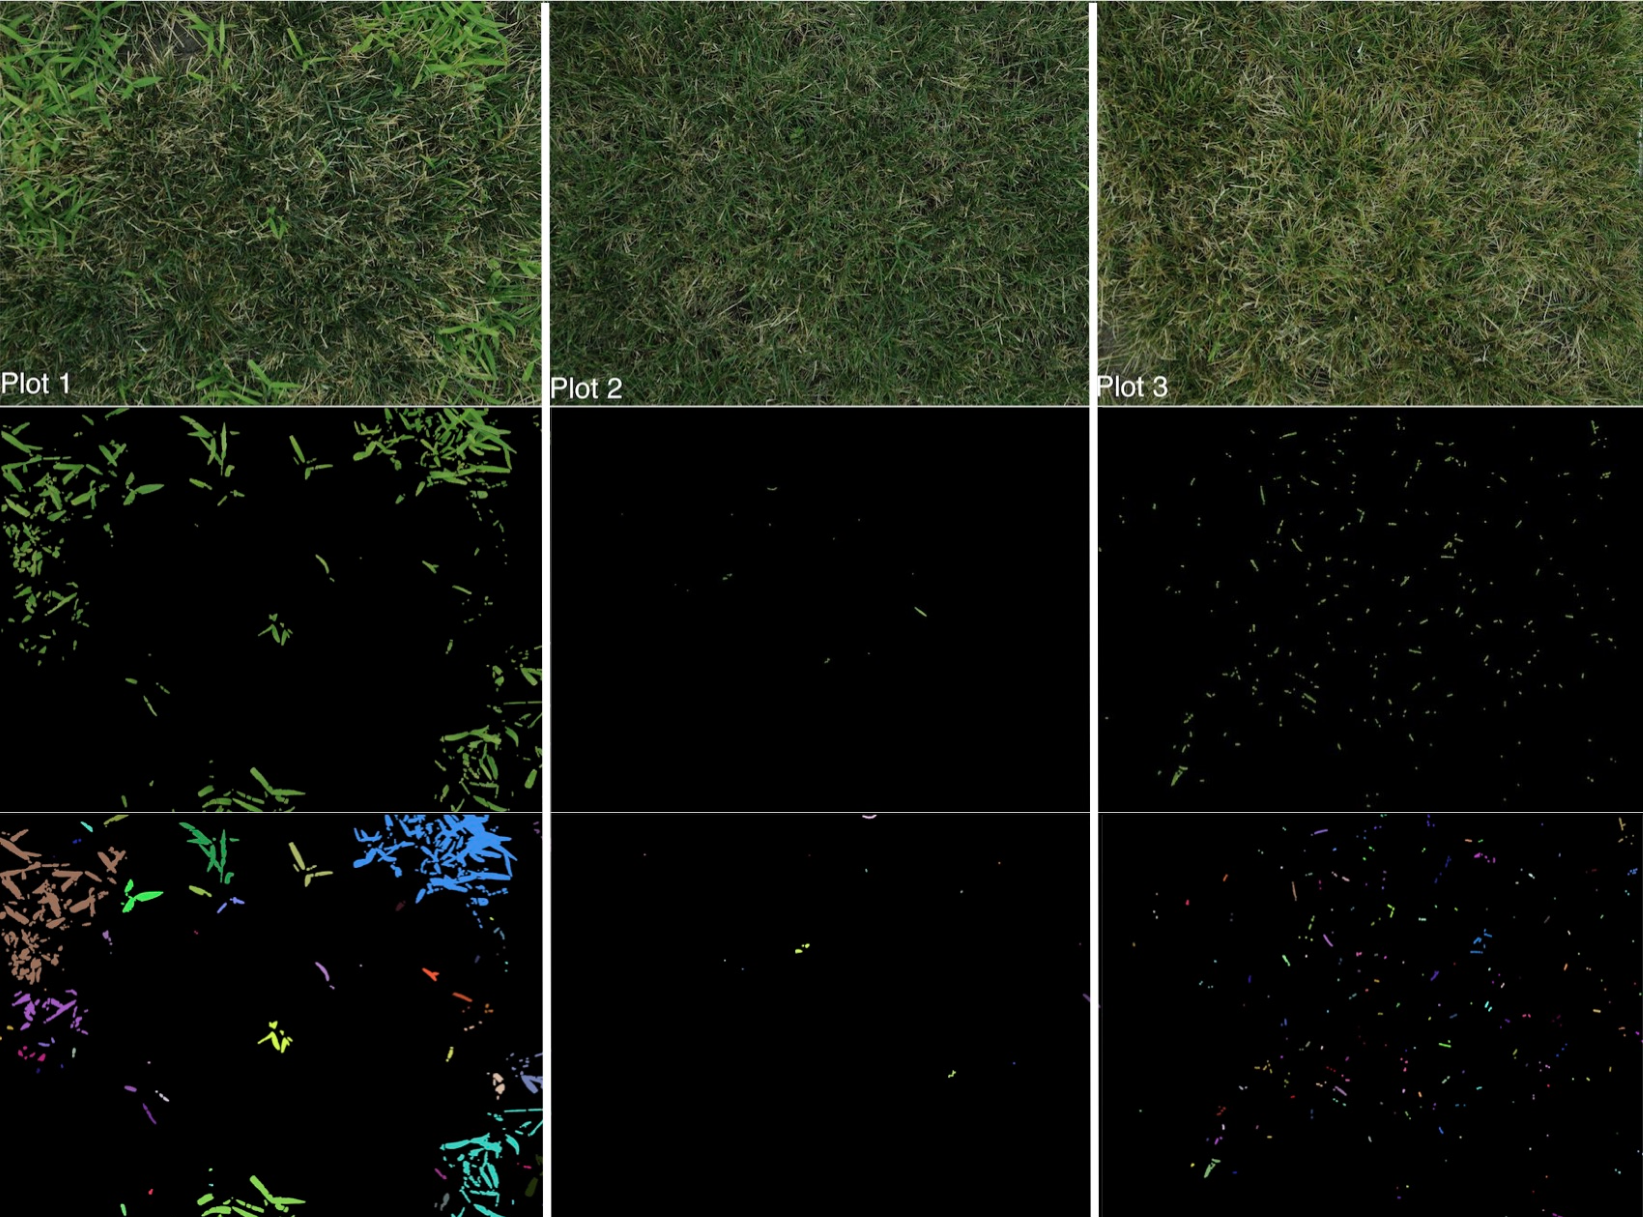 Original images of the three perennial ryegrass plots compared with the images of crabgrass and also images of crabgrass clusters